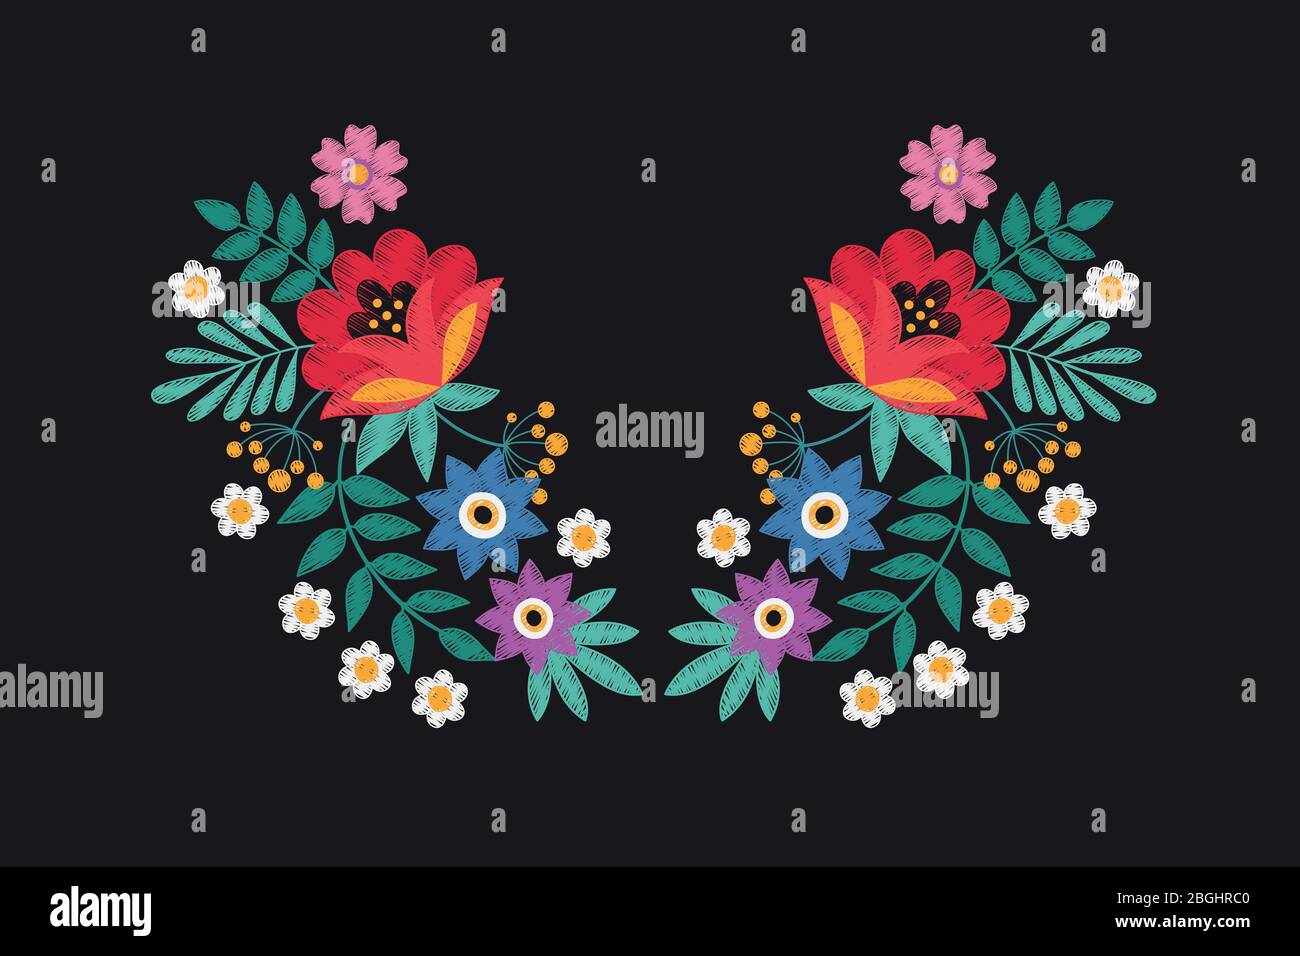 Collar embroidery floral design with wildflowers. Stitching detail tribal necklace with flowers isolated vector illustration. Floral colored embroidery with flower bouquet and green leaf Stock Vector